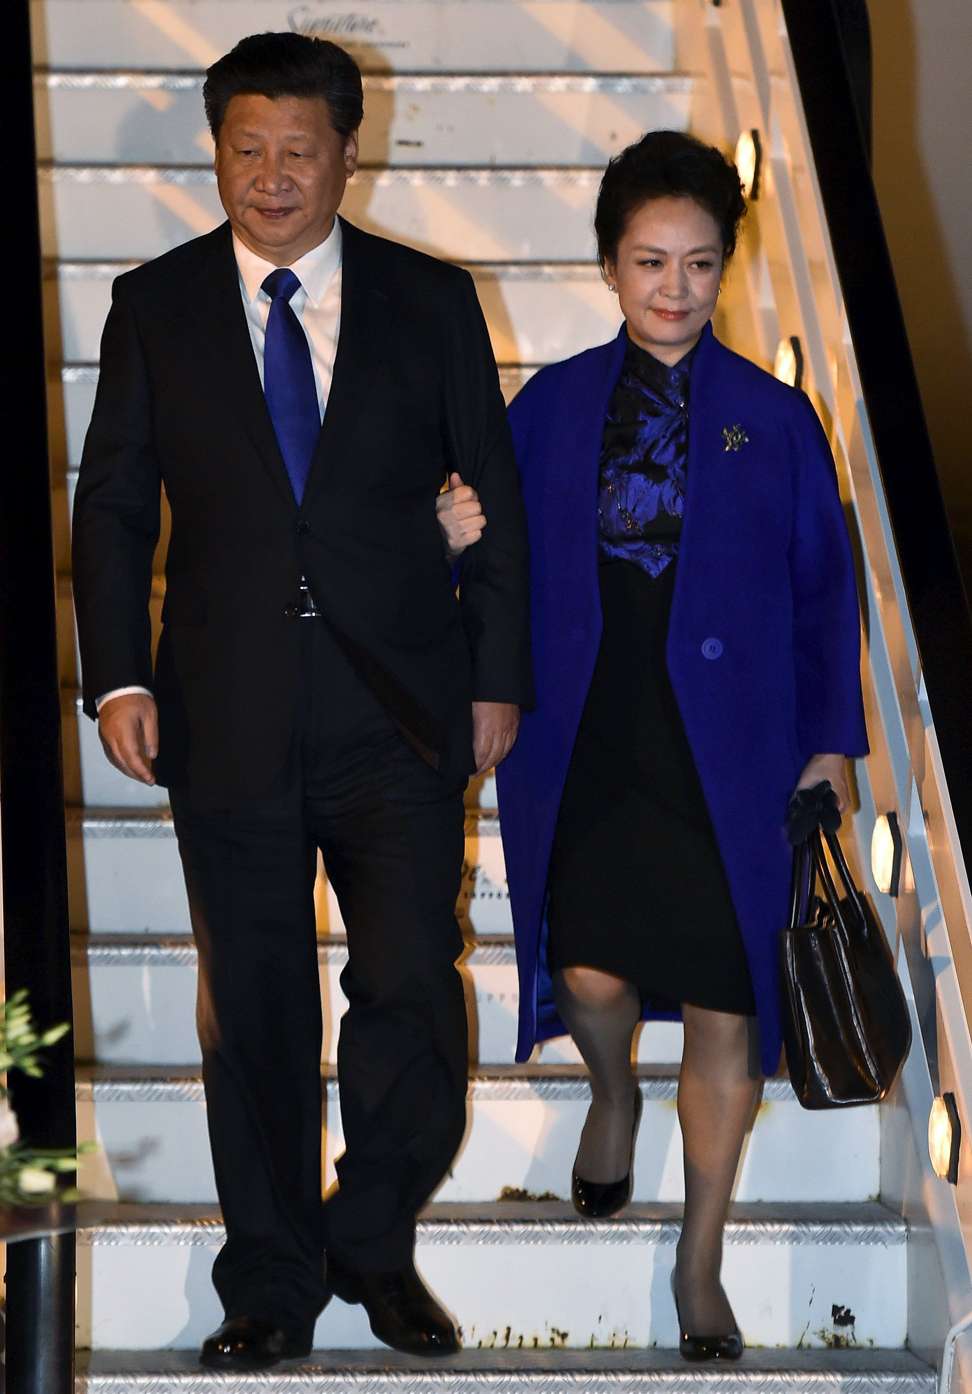 Chinese President Xi Jinping and his wife Peng Liyuan arrive at Heathrow Airport in London on October 19, 2015, for a four-day state visit. Photo: AFP